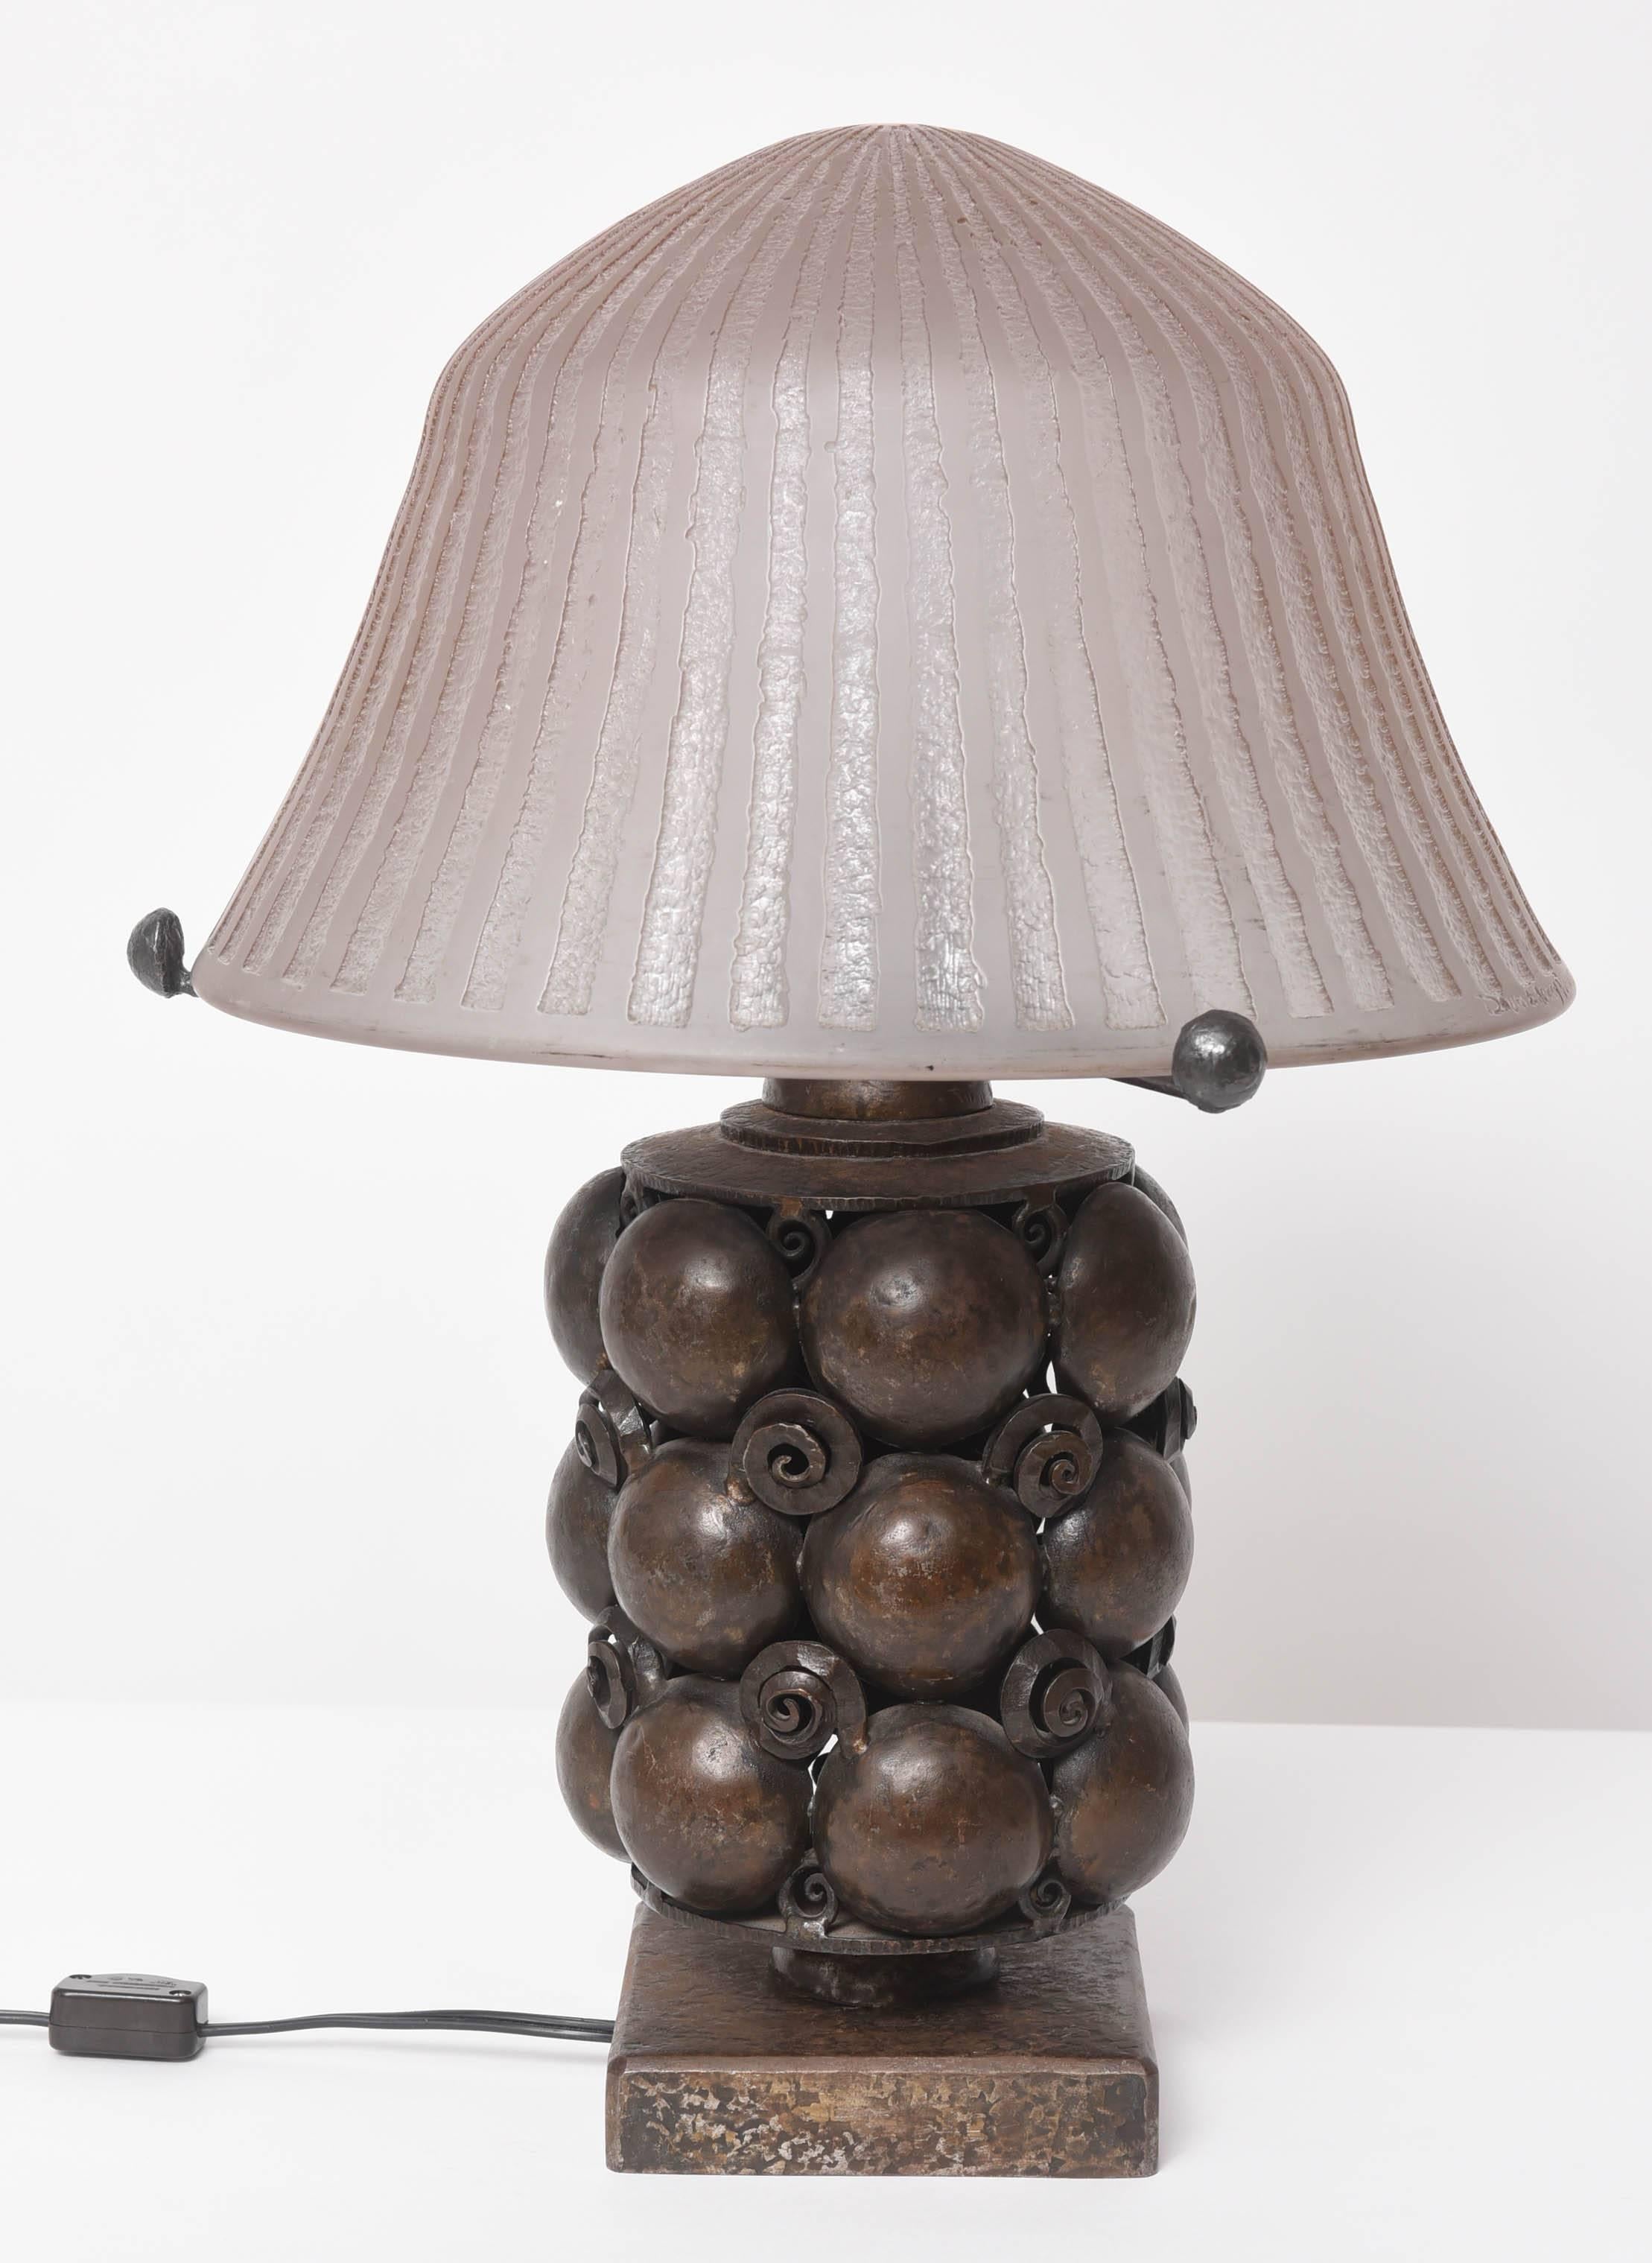 Art Deco Bronze Table Lamp Attributed to Edgar Brandt with Daum Nancy Shade For Sale 3